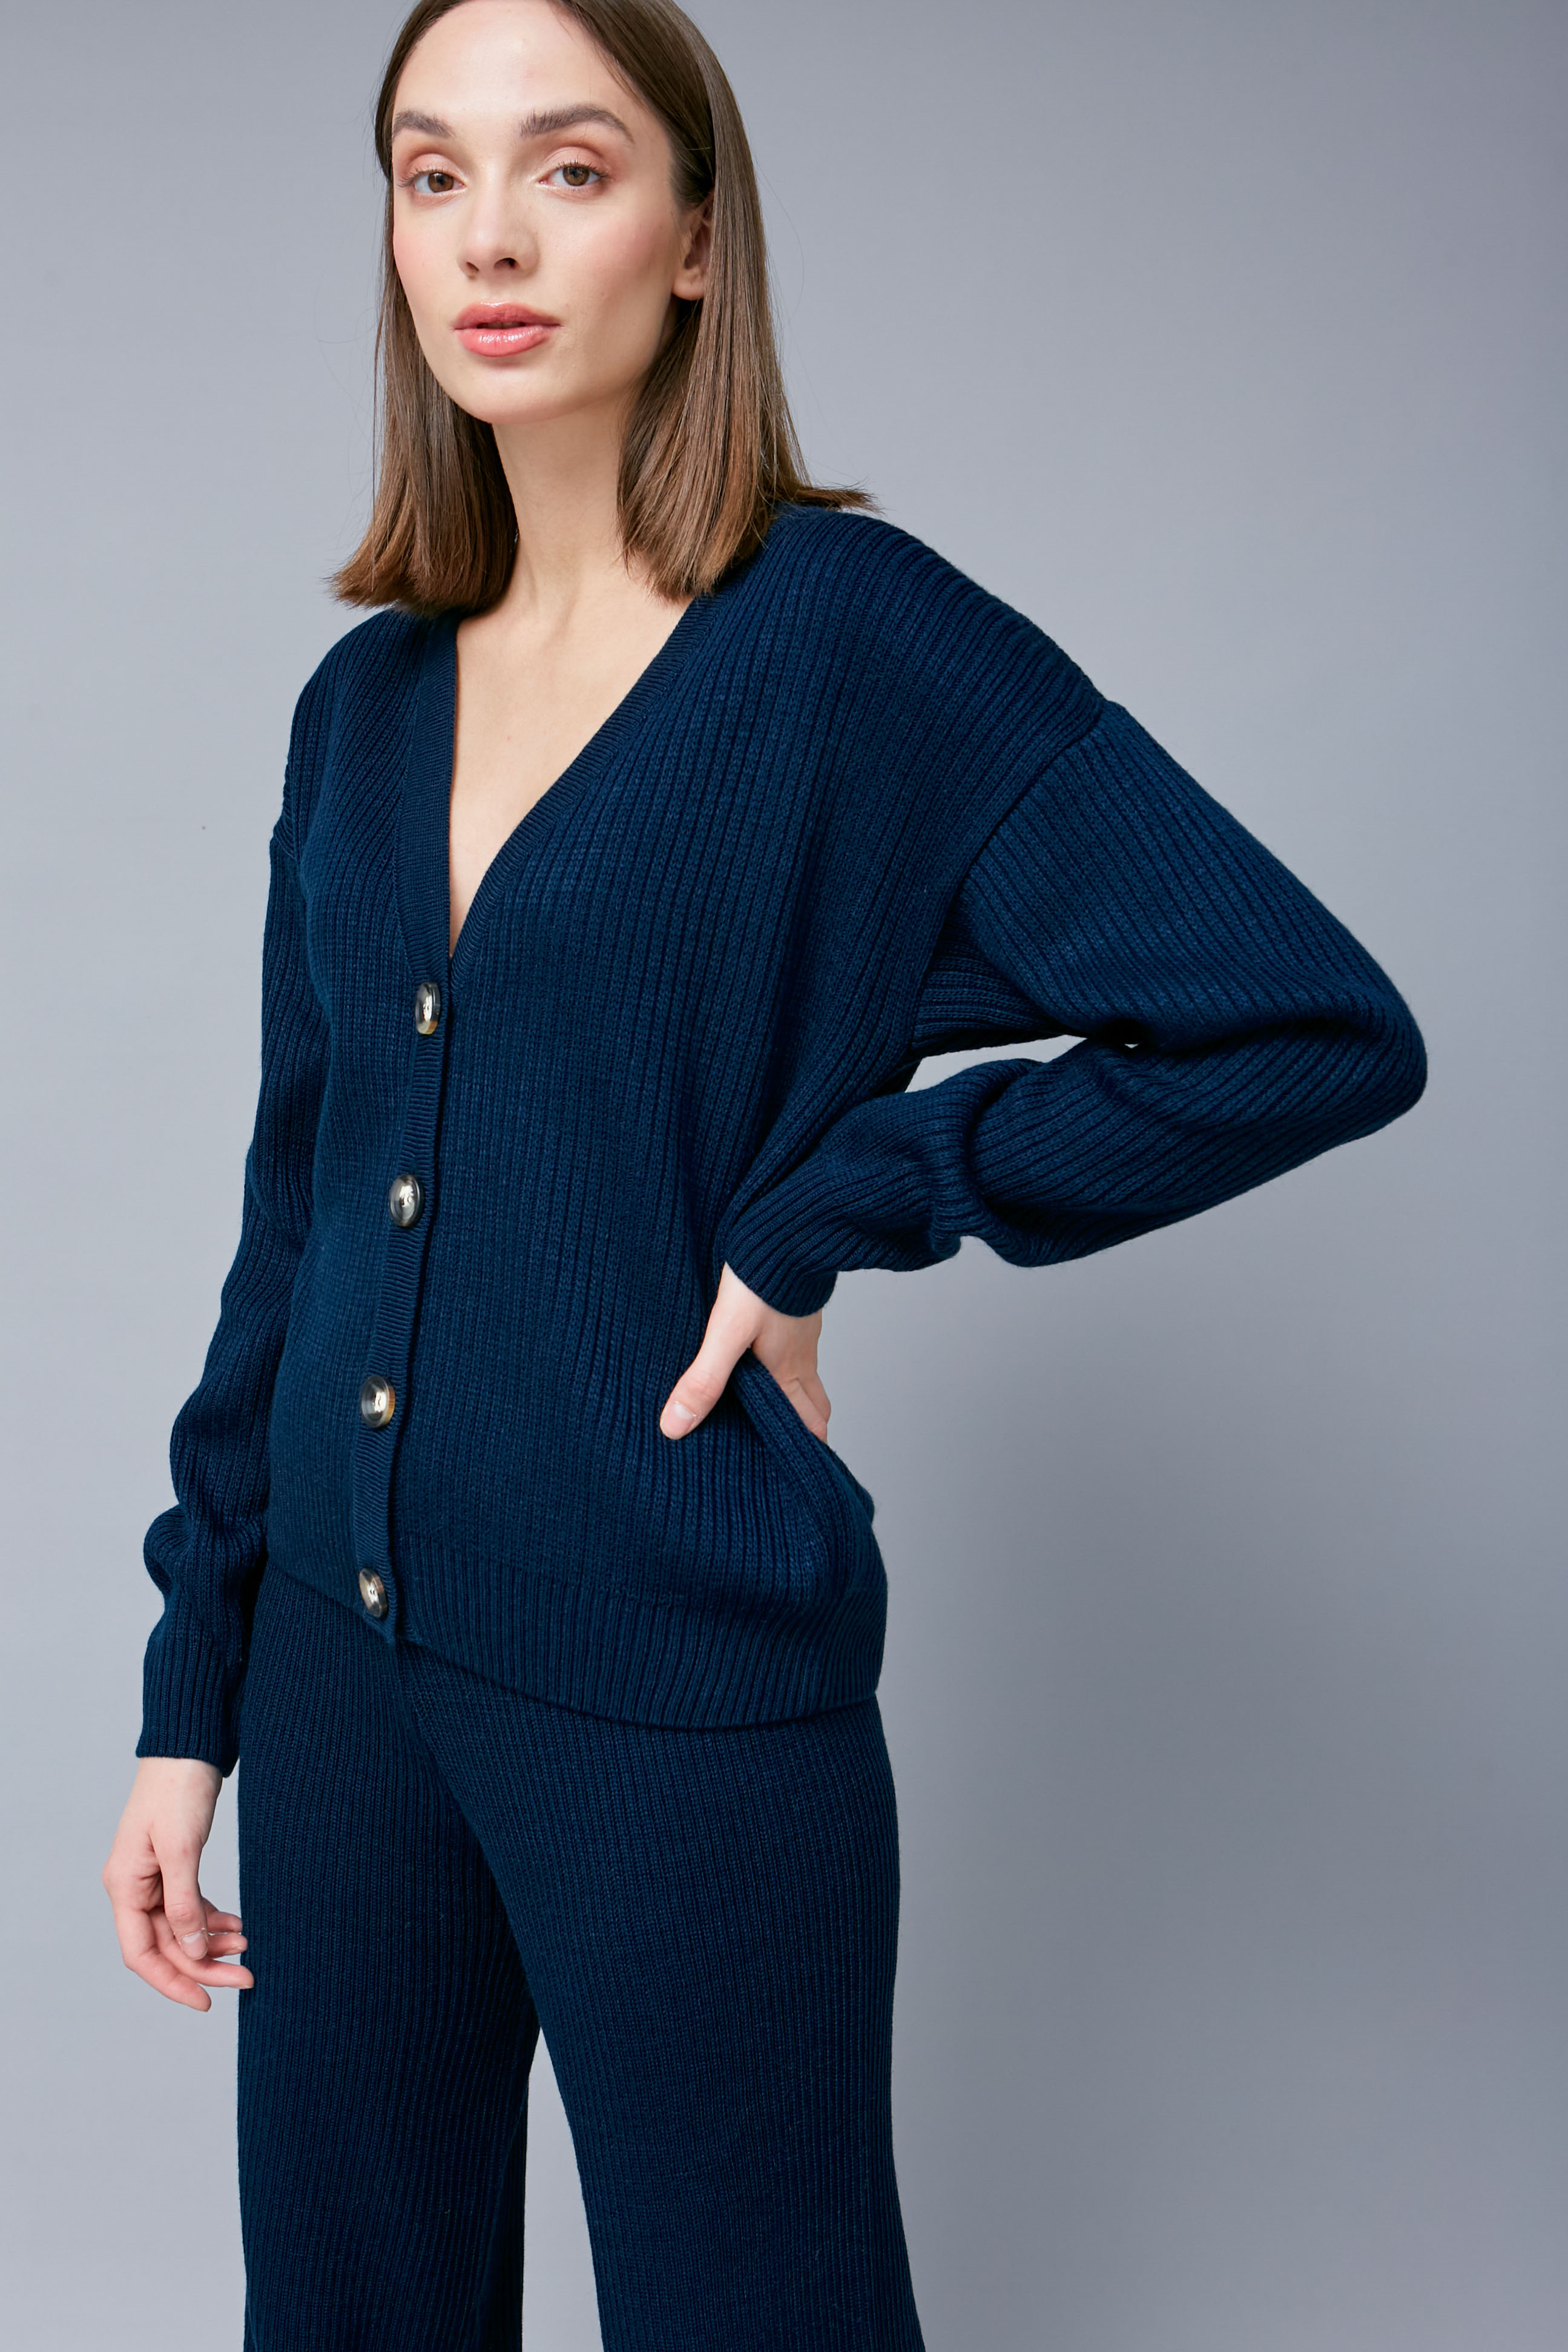 Blue knit cardigan with buttons, photo 1